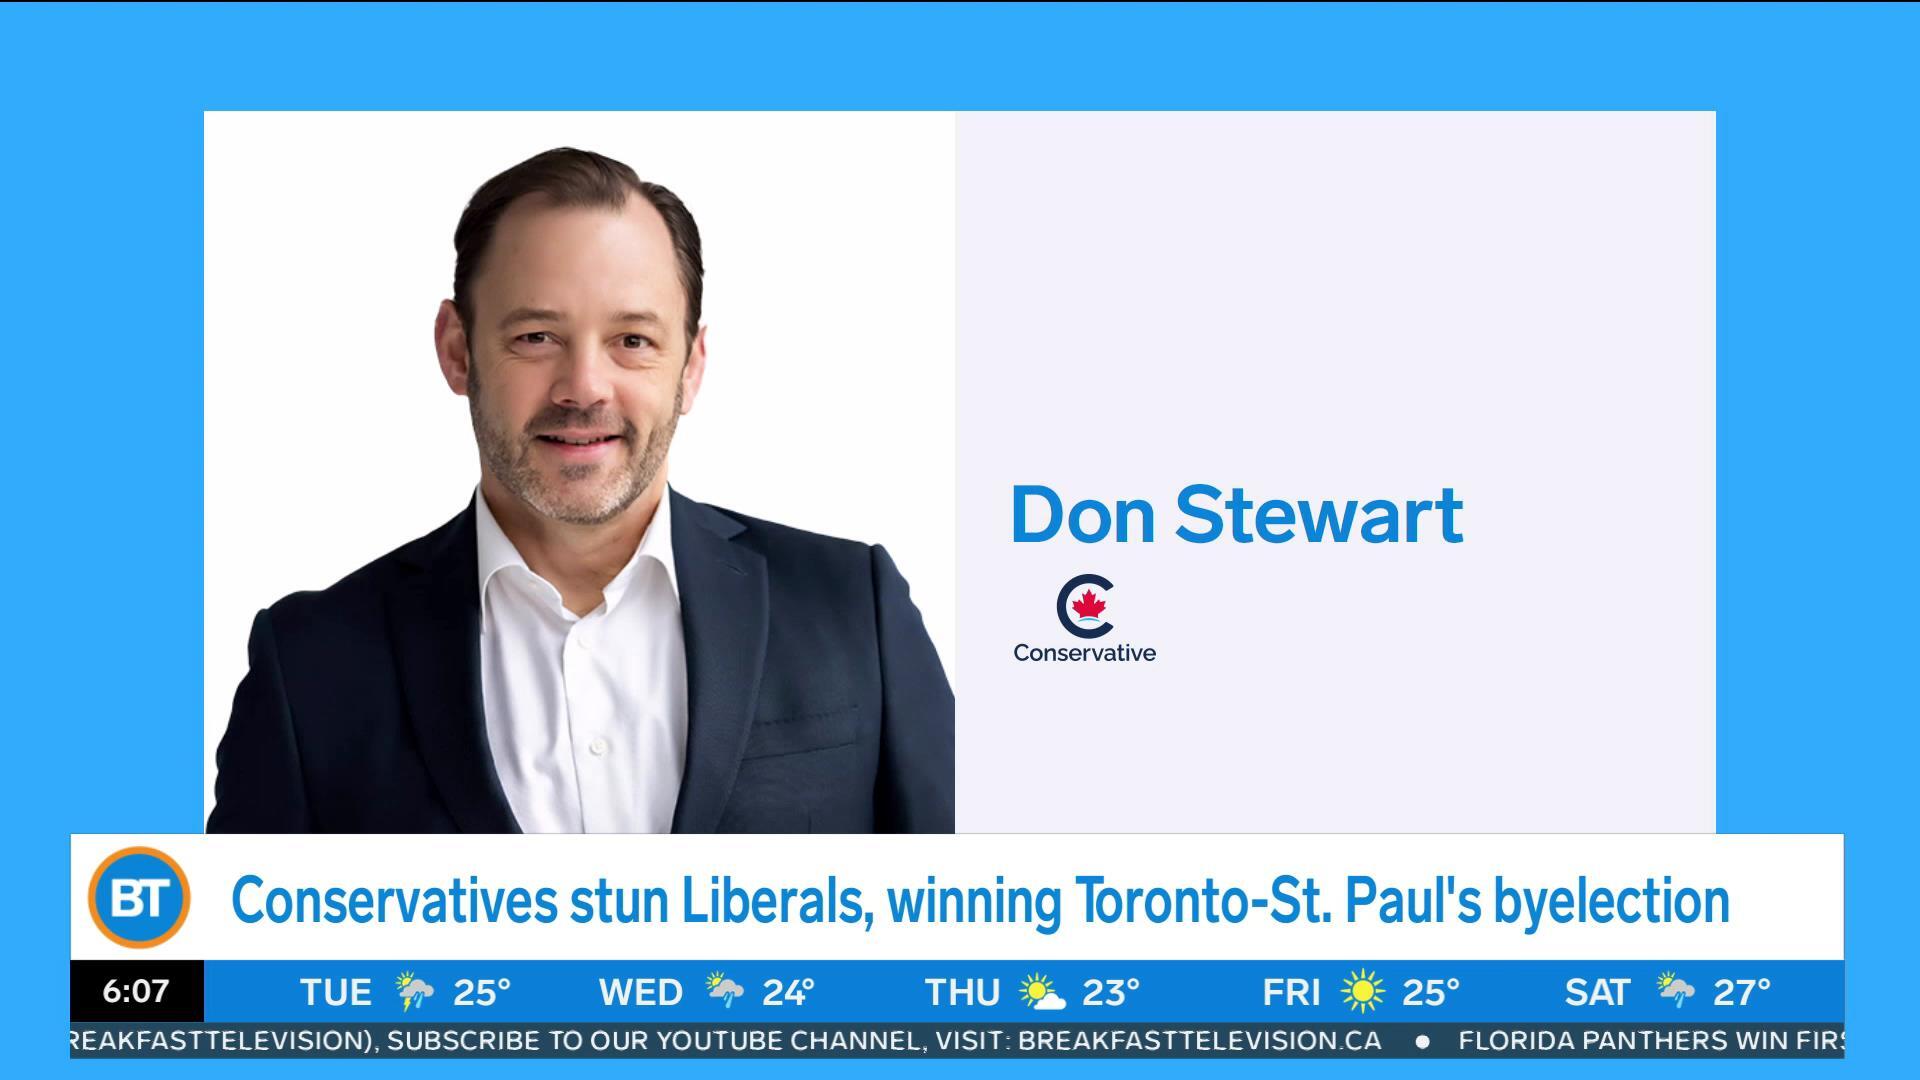 Conservatives stun Liberals with federal byelection win in Toronto-St. Paul's